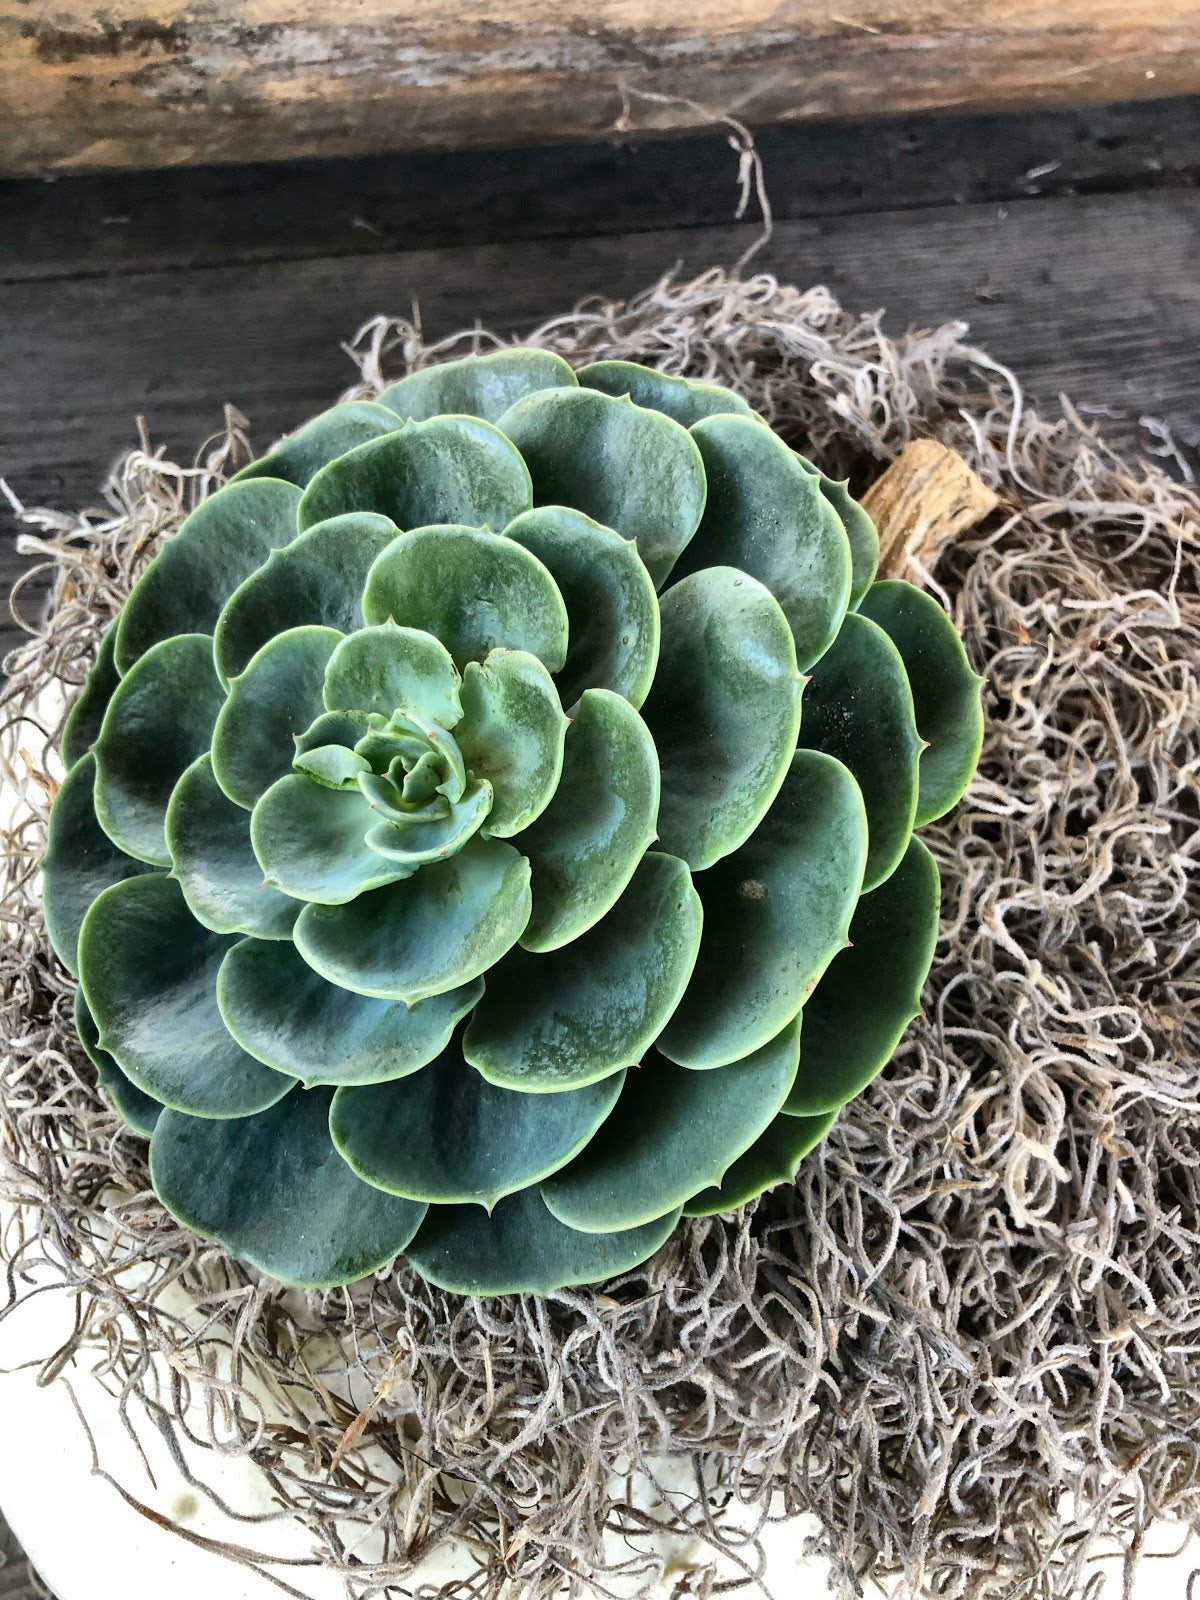 Succulent pumpkin! Just get a pumpkin and spray Elmer's adhesive spray glue  on top, stick on some Spanish moss and then gl…